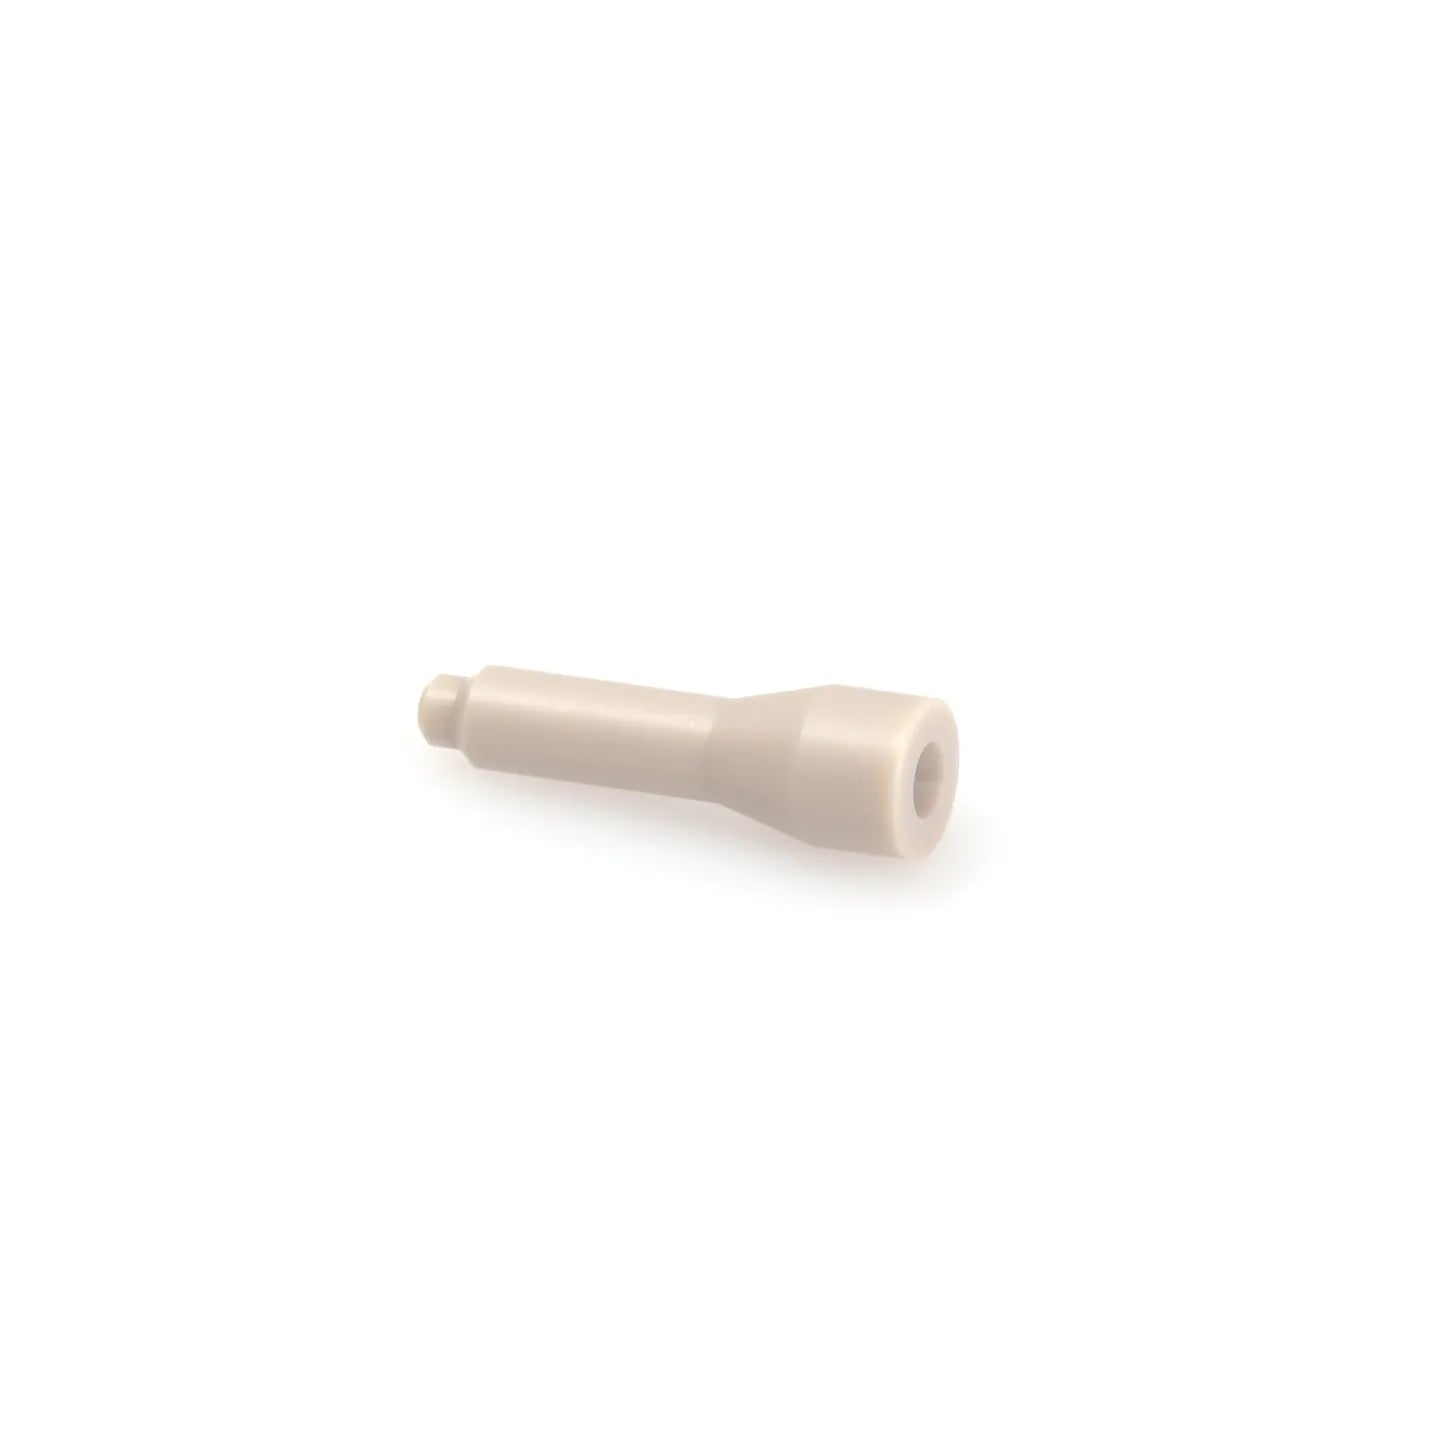 Needle Seal, PEEK™, Comparable to Shimadzu # 228-78538-41, Old # 228-50390-00